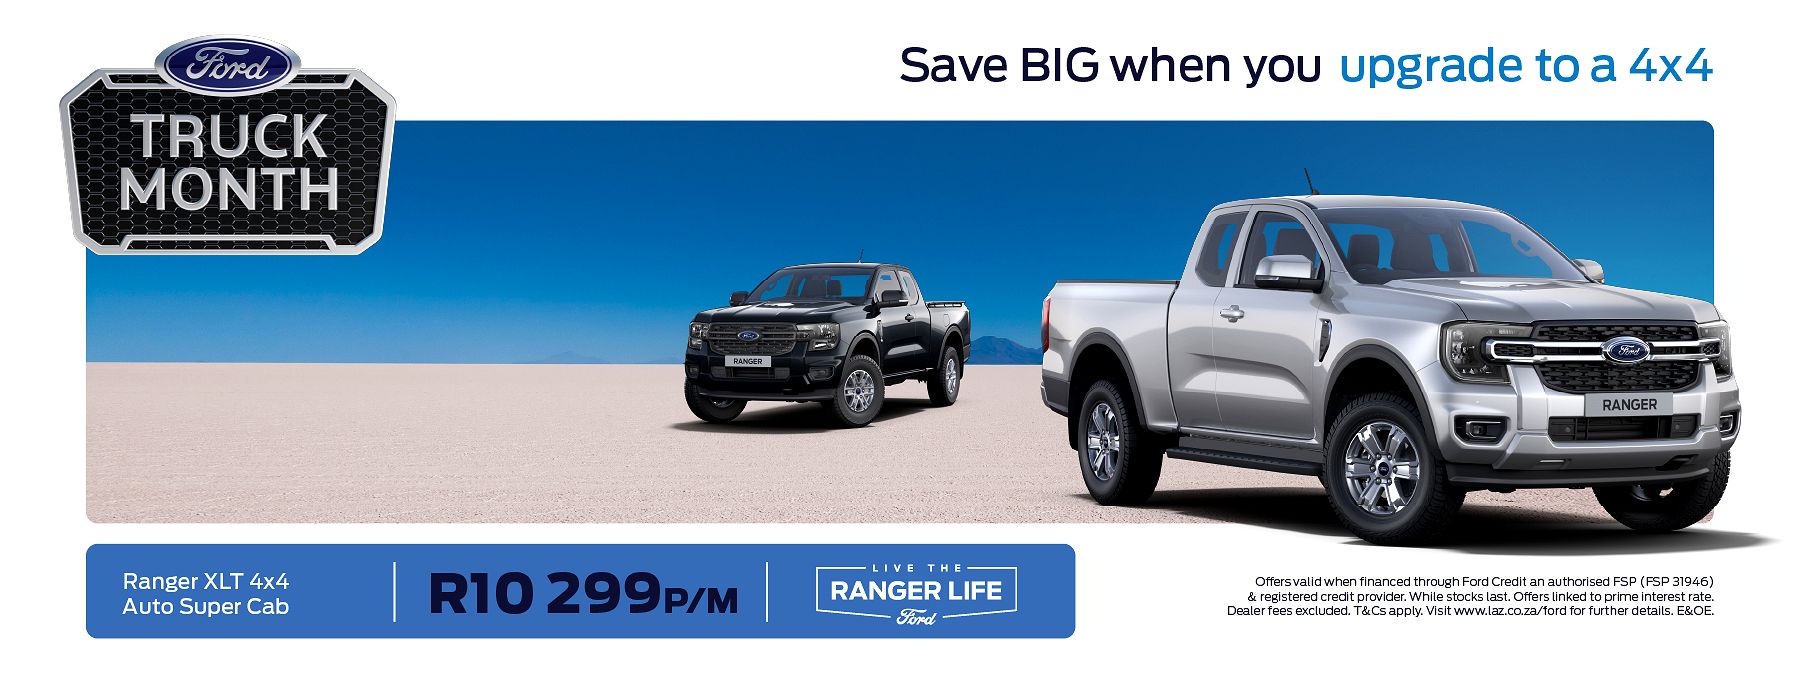 Save BIG when you Upgrade to a 4x4